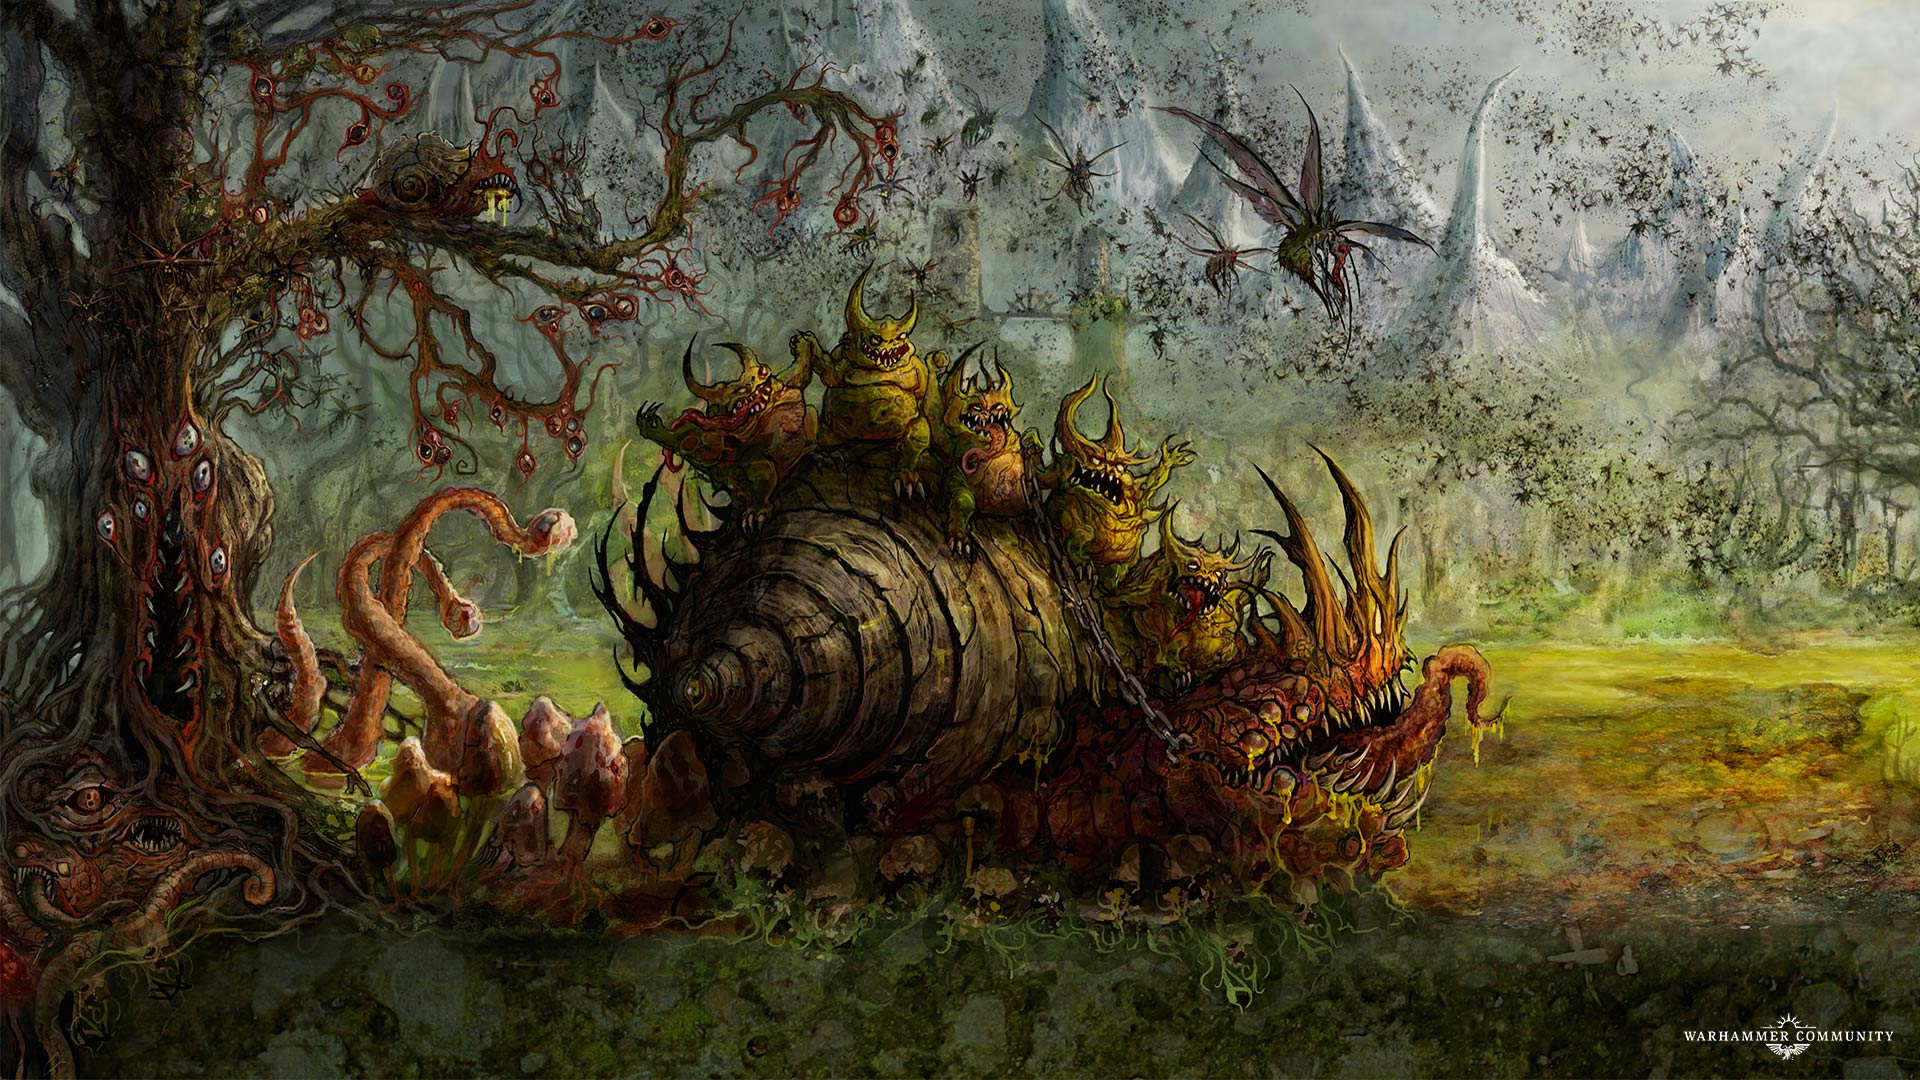 The Seventh Day of Nurgle: The Feculent Gnarlmaw